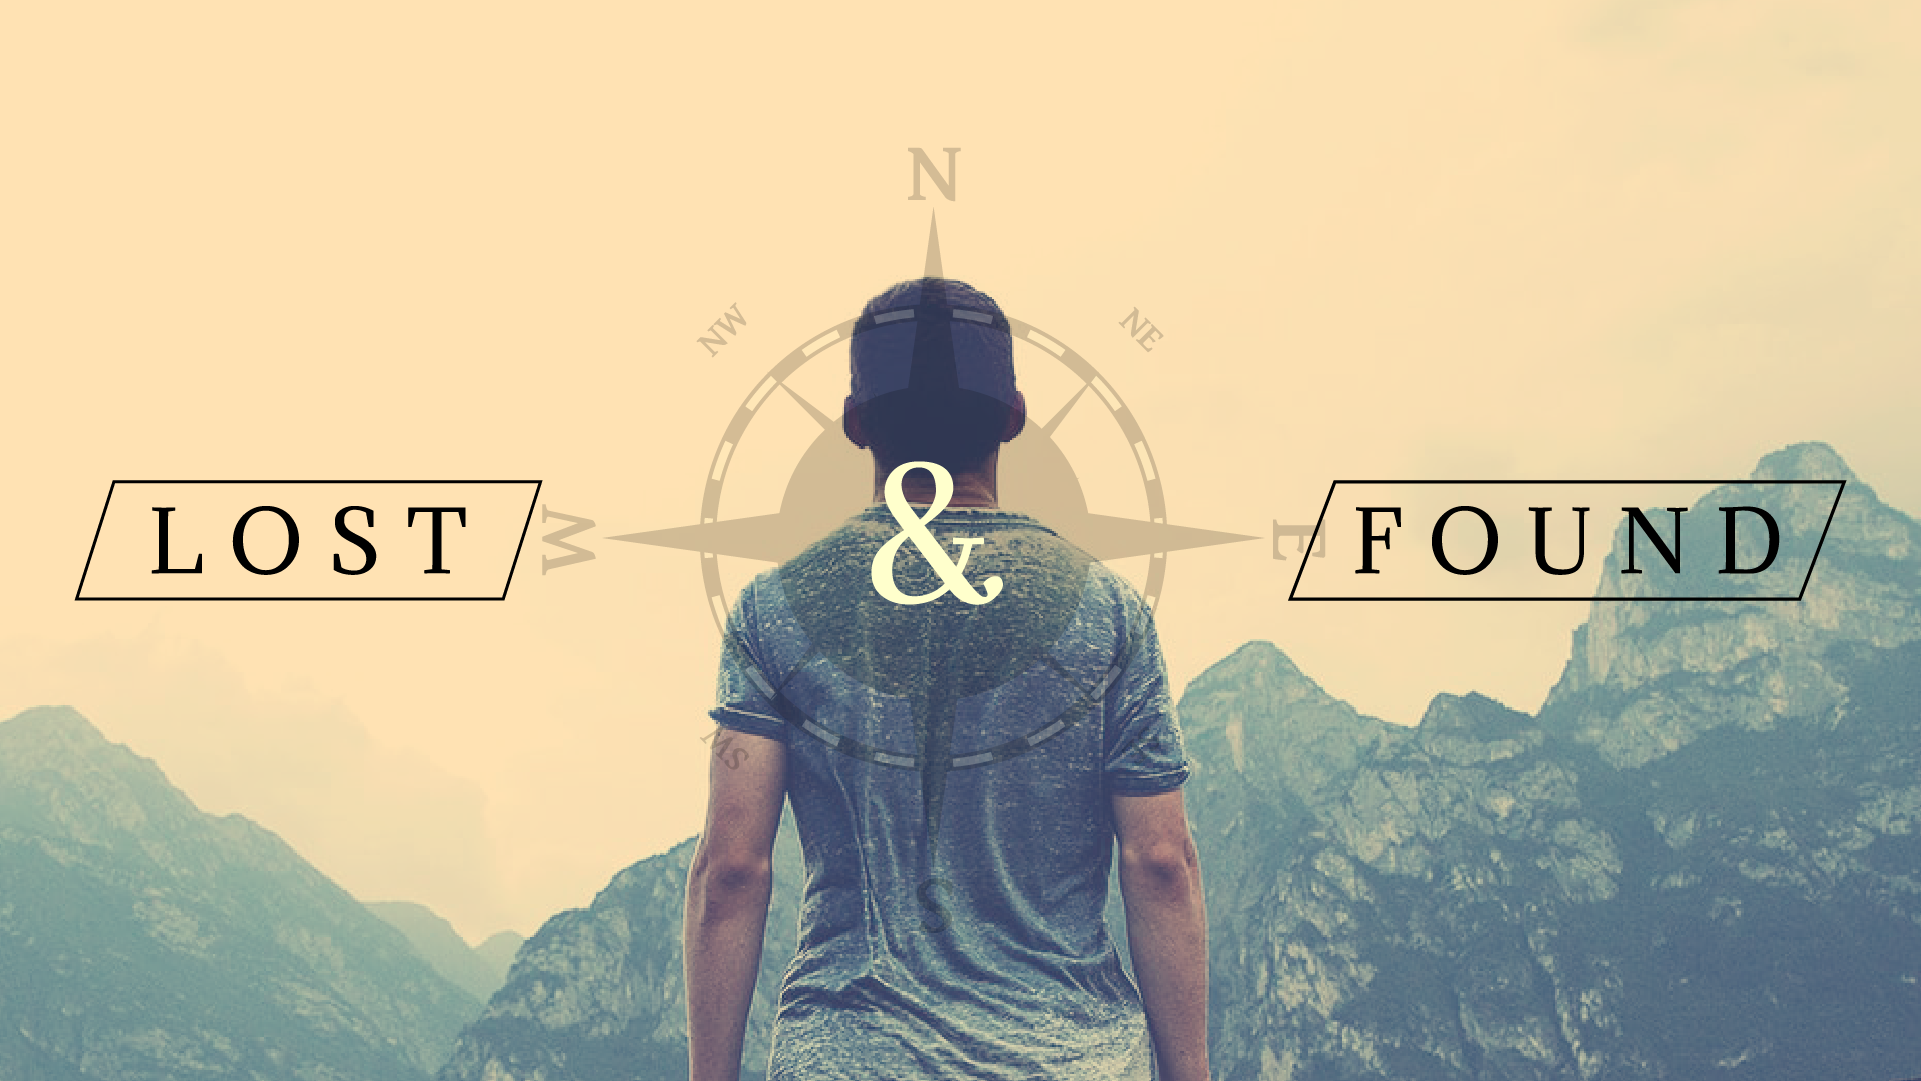 Lost & Found_Sermon Graphics_Side Screen_1920x1080.png